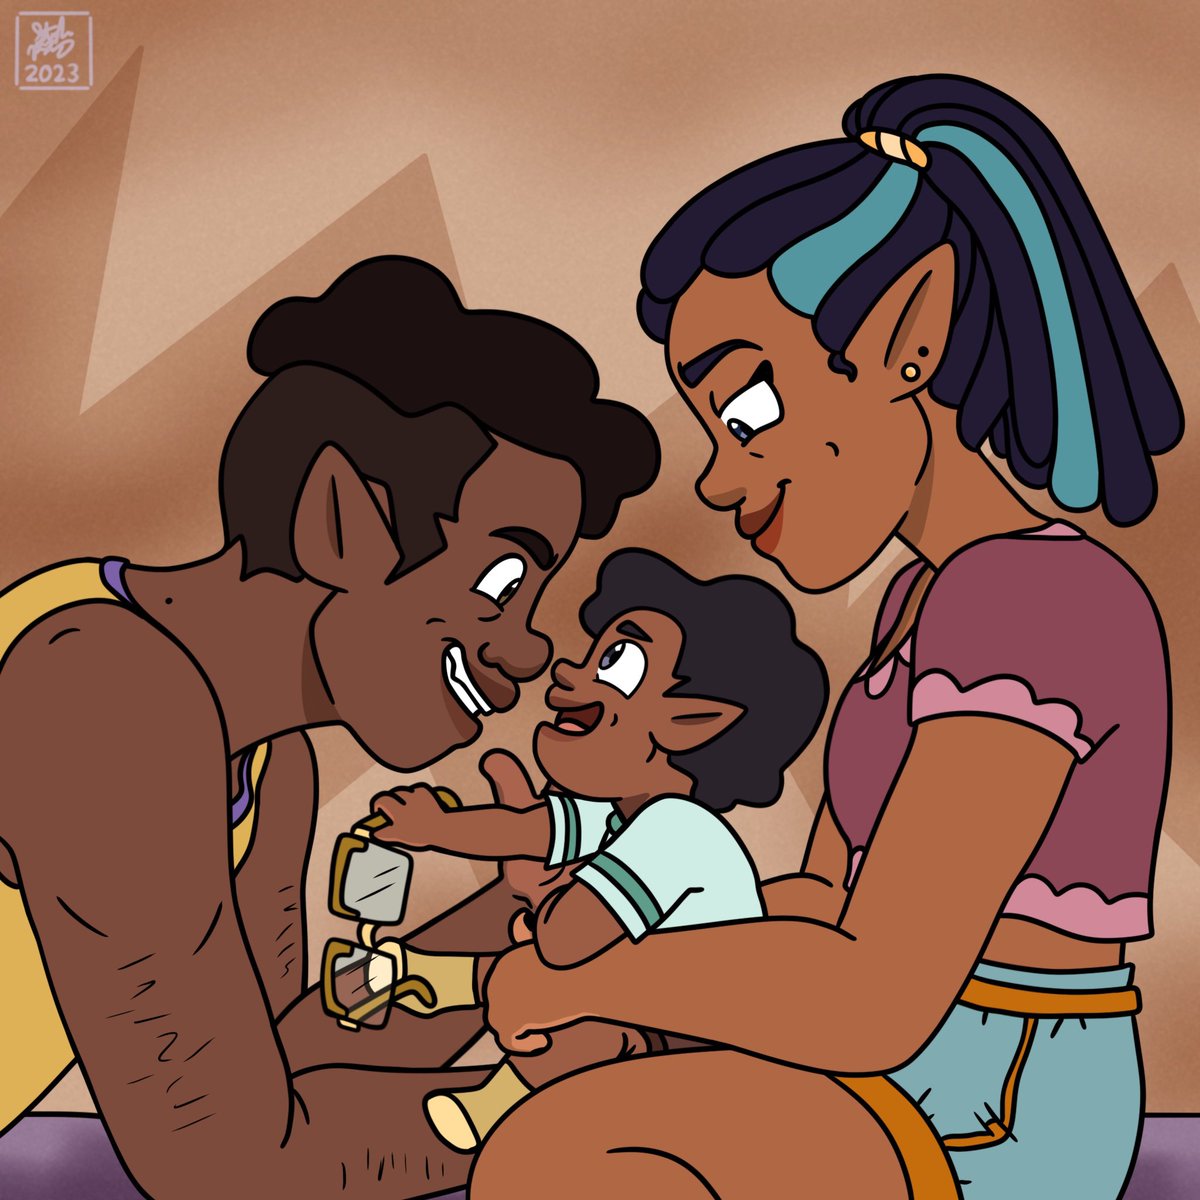 Gus Week Day 2: Family
•
Baby Augustus the glasses thief strikes again 💪
•
#gusweek2023 #gusporter #TheOwlHouse #perryporter #tohoc